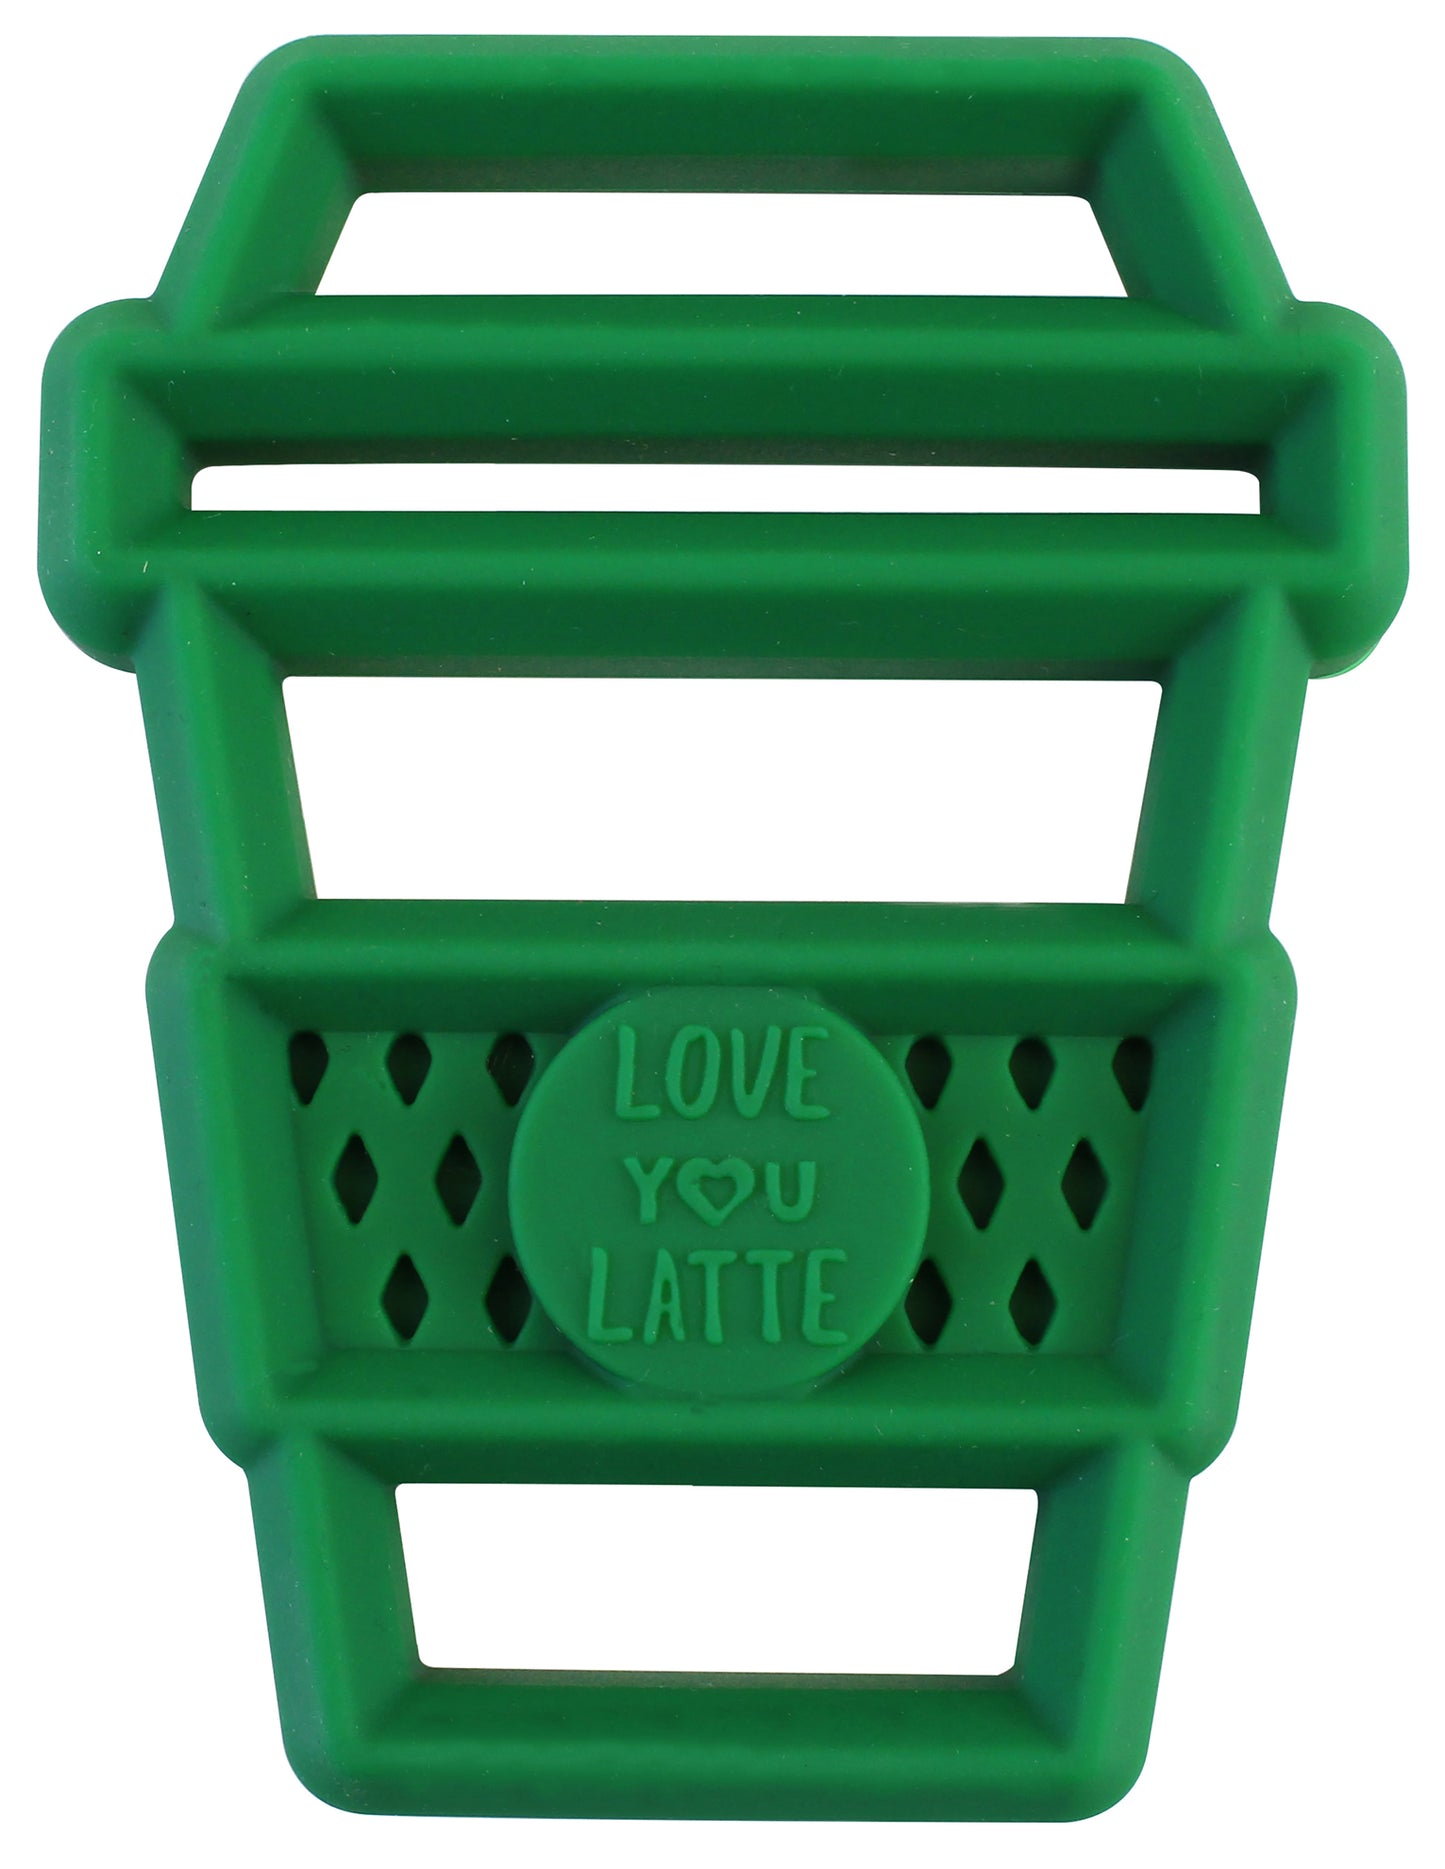 Chew Crew Silicone Teether, Latte